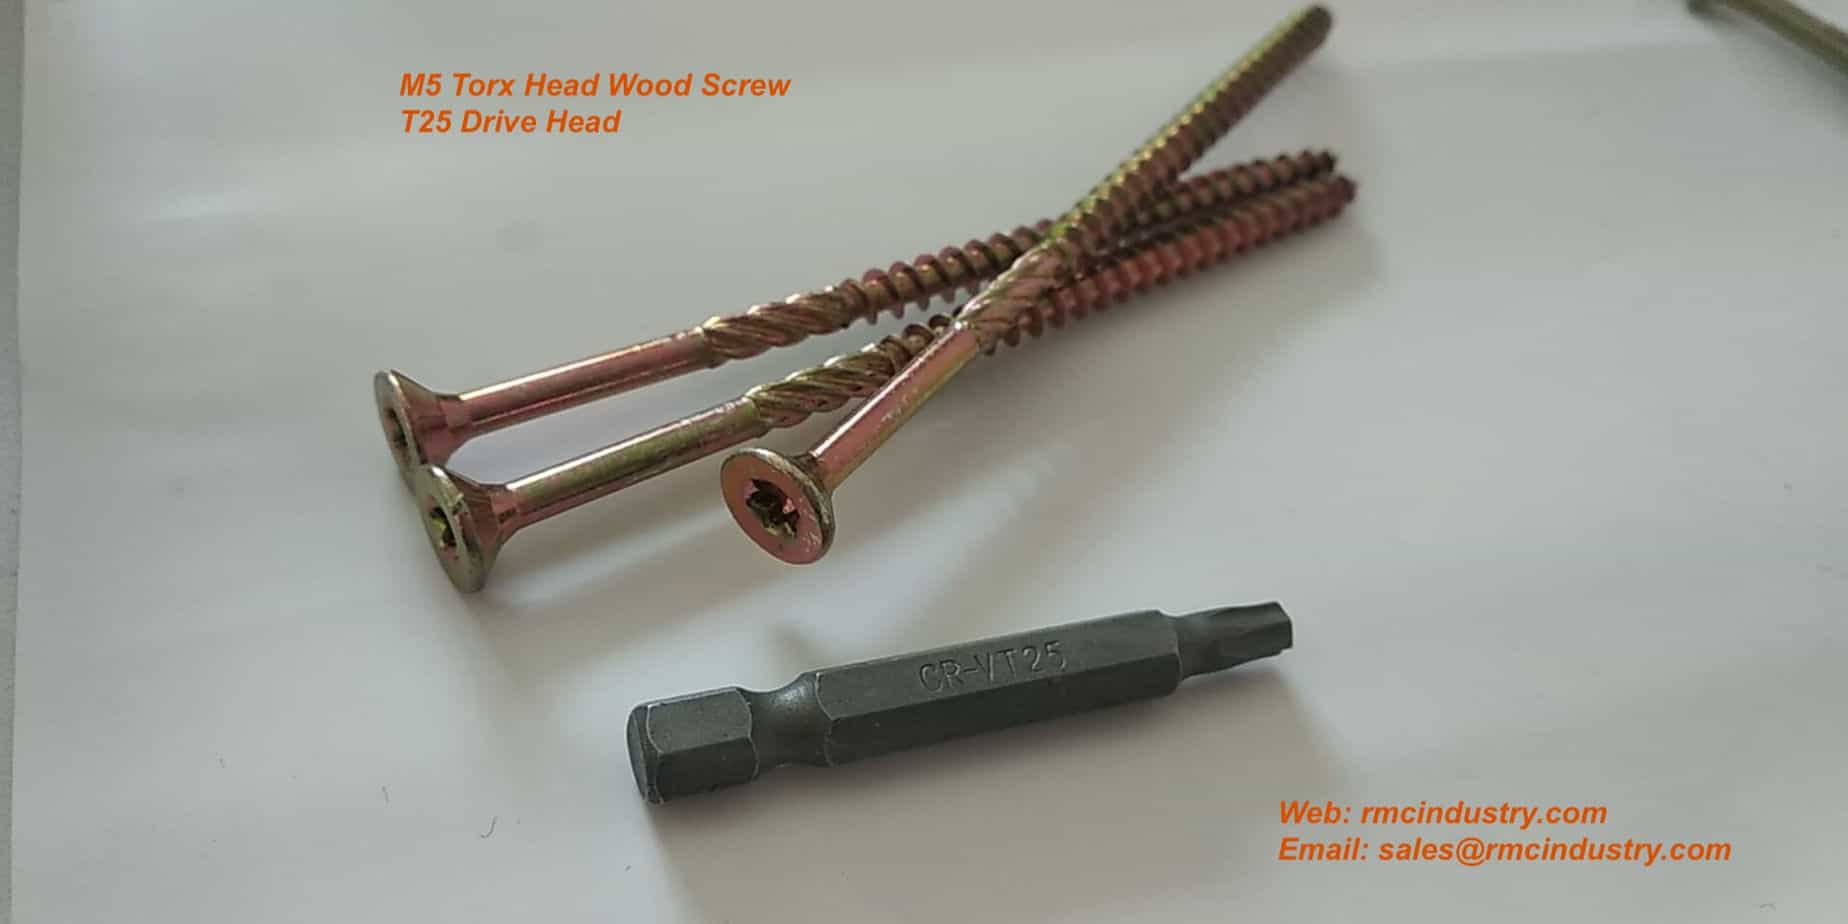 M5X90mm Torx Head Wood Screw with T25 Drive Head_ wood sturcture construction for rope courses, zip lines_RMC